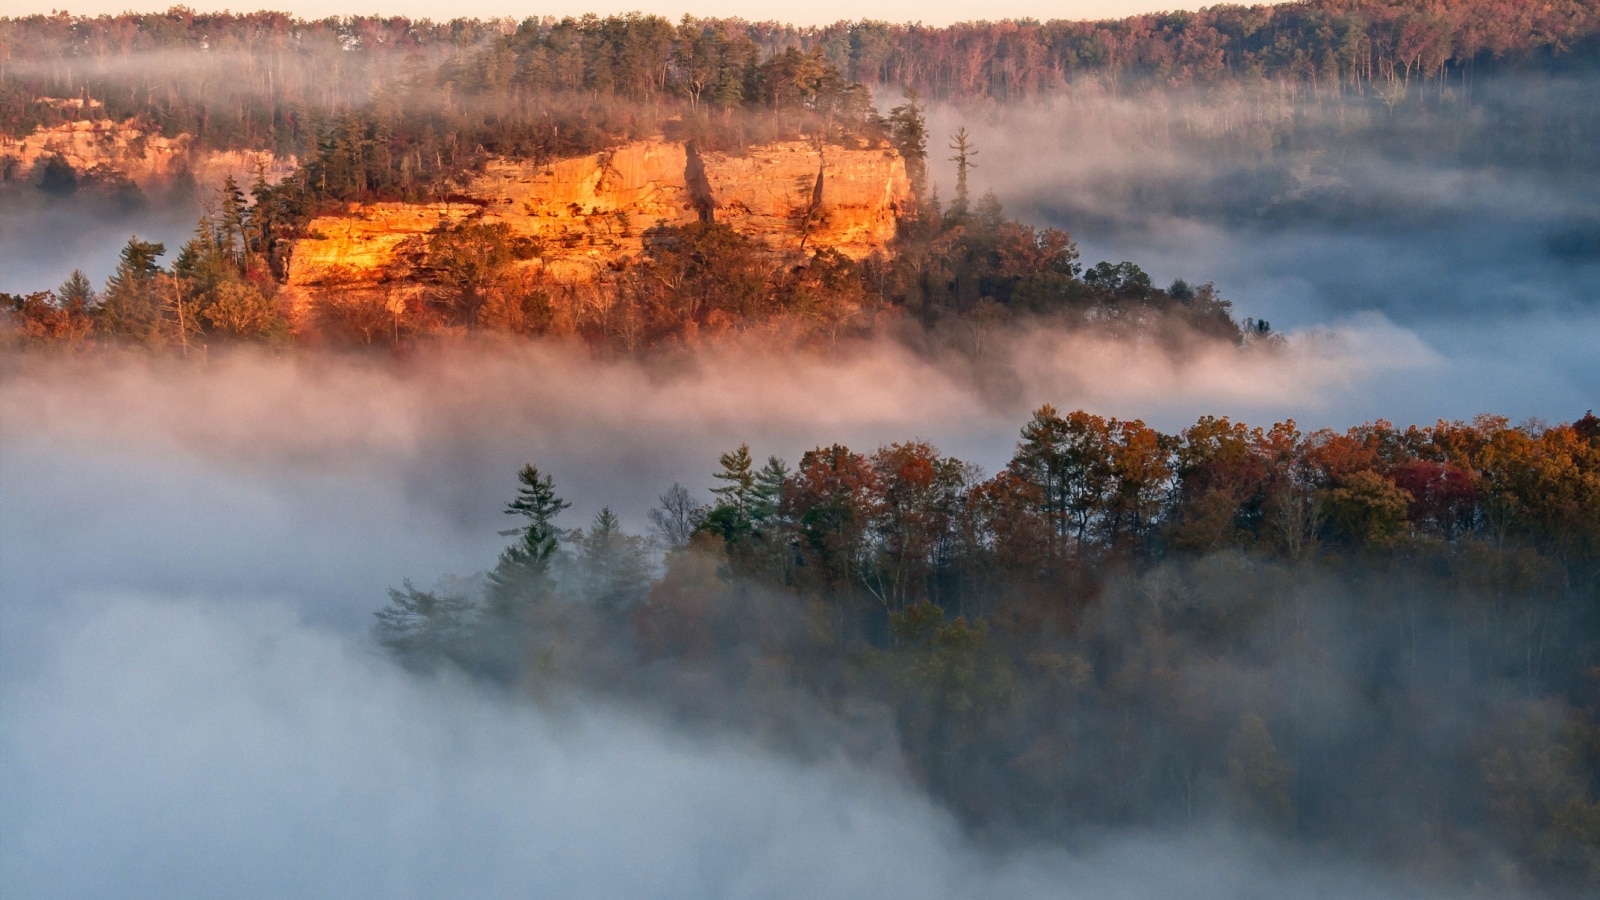 A grand view of cliff faces in the fog in the Red River Gorge in Kentucky